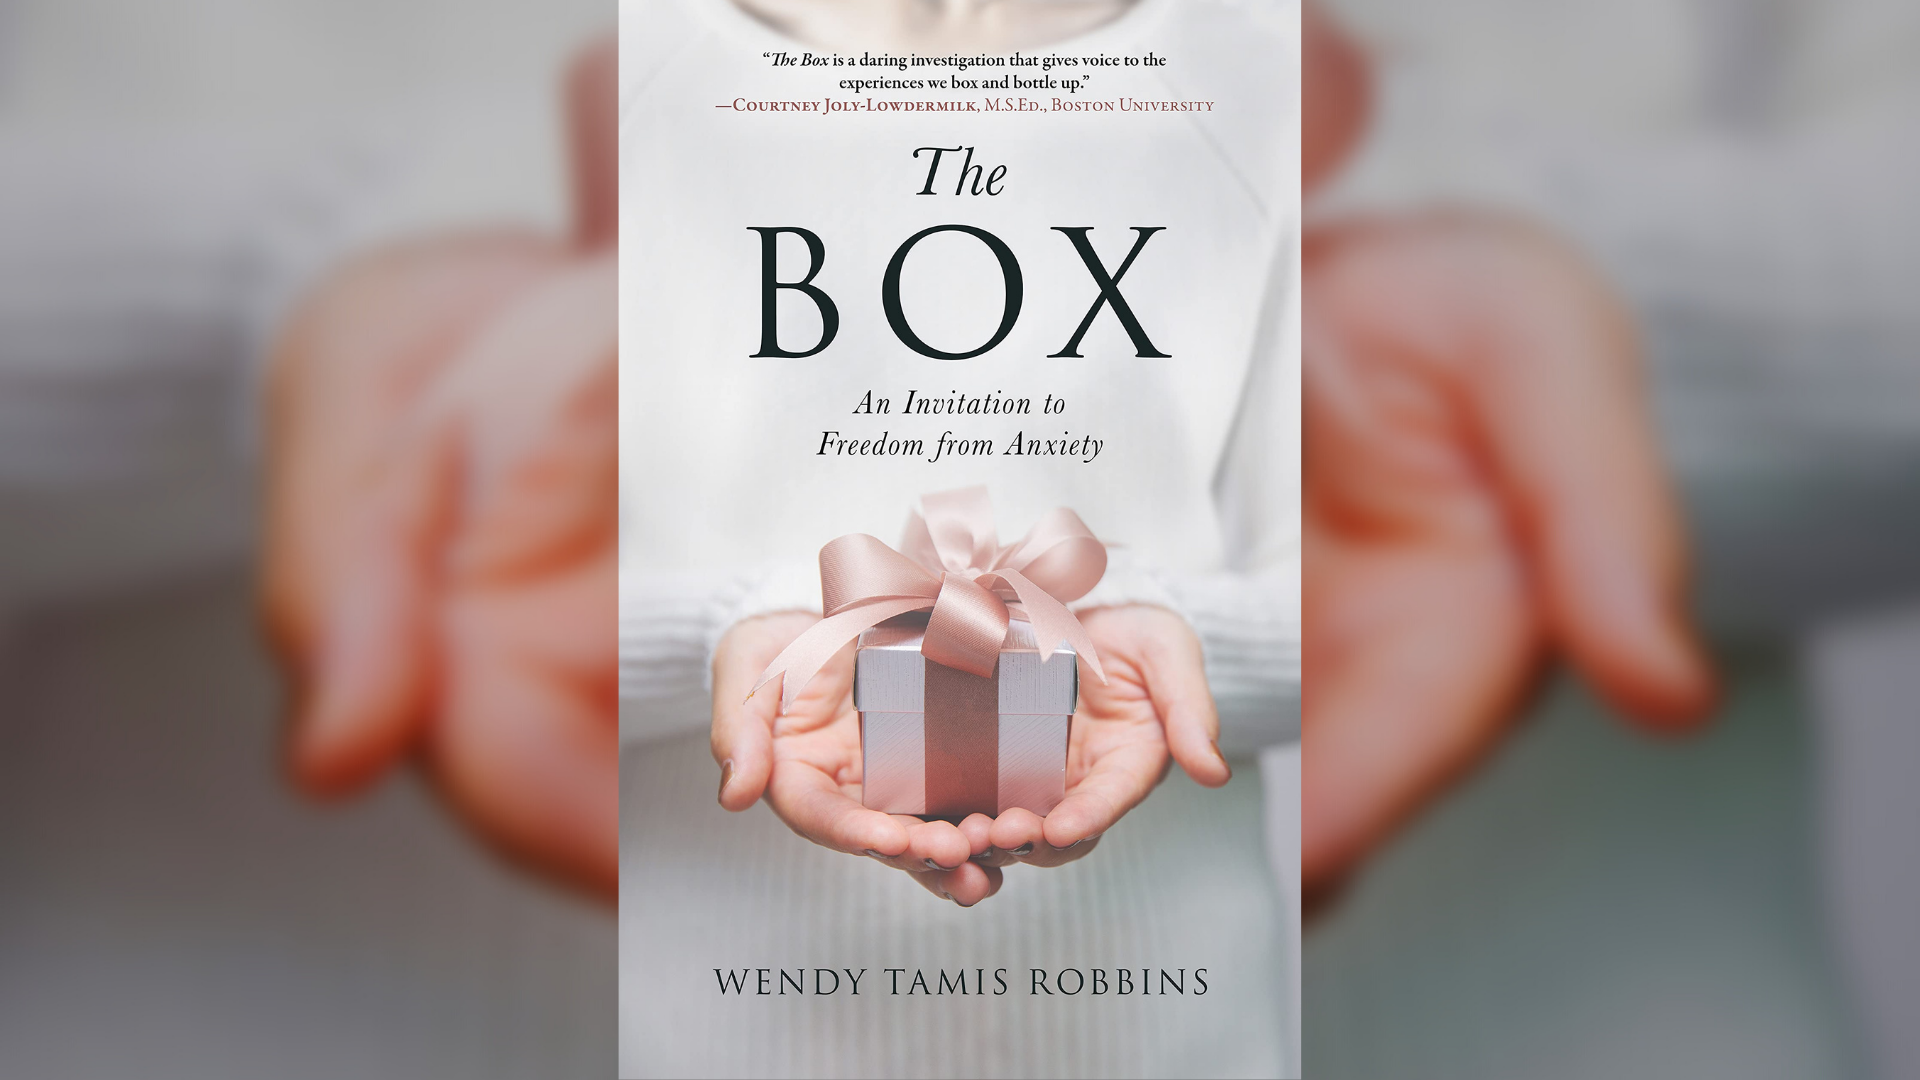 Author Wendy Tamis Robbins shares her mental health journey as a former college athlete in "The Box: An Invitation to Freedom From Anxiety." #newdaynw